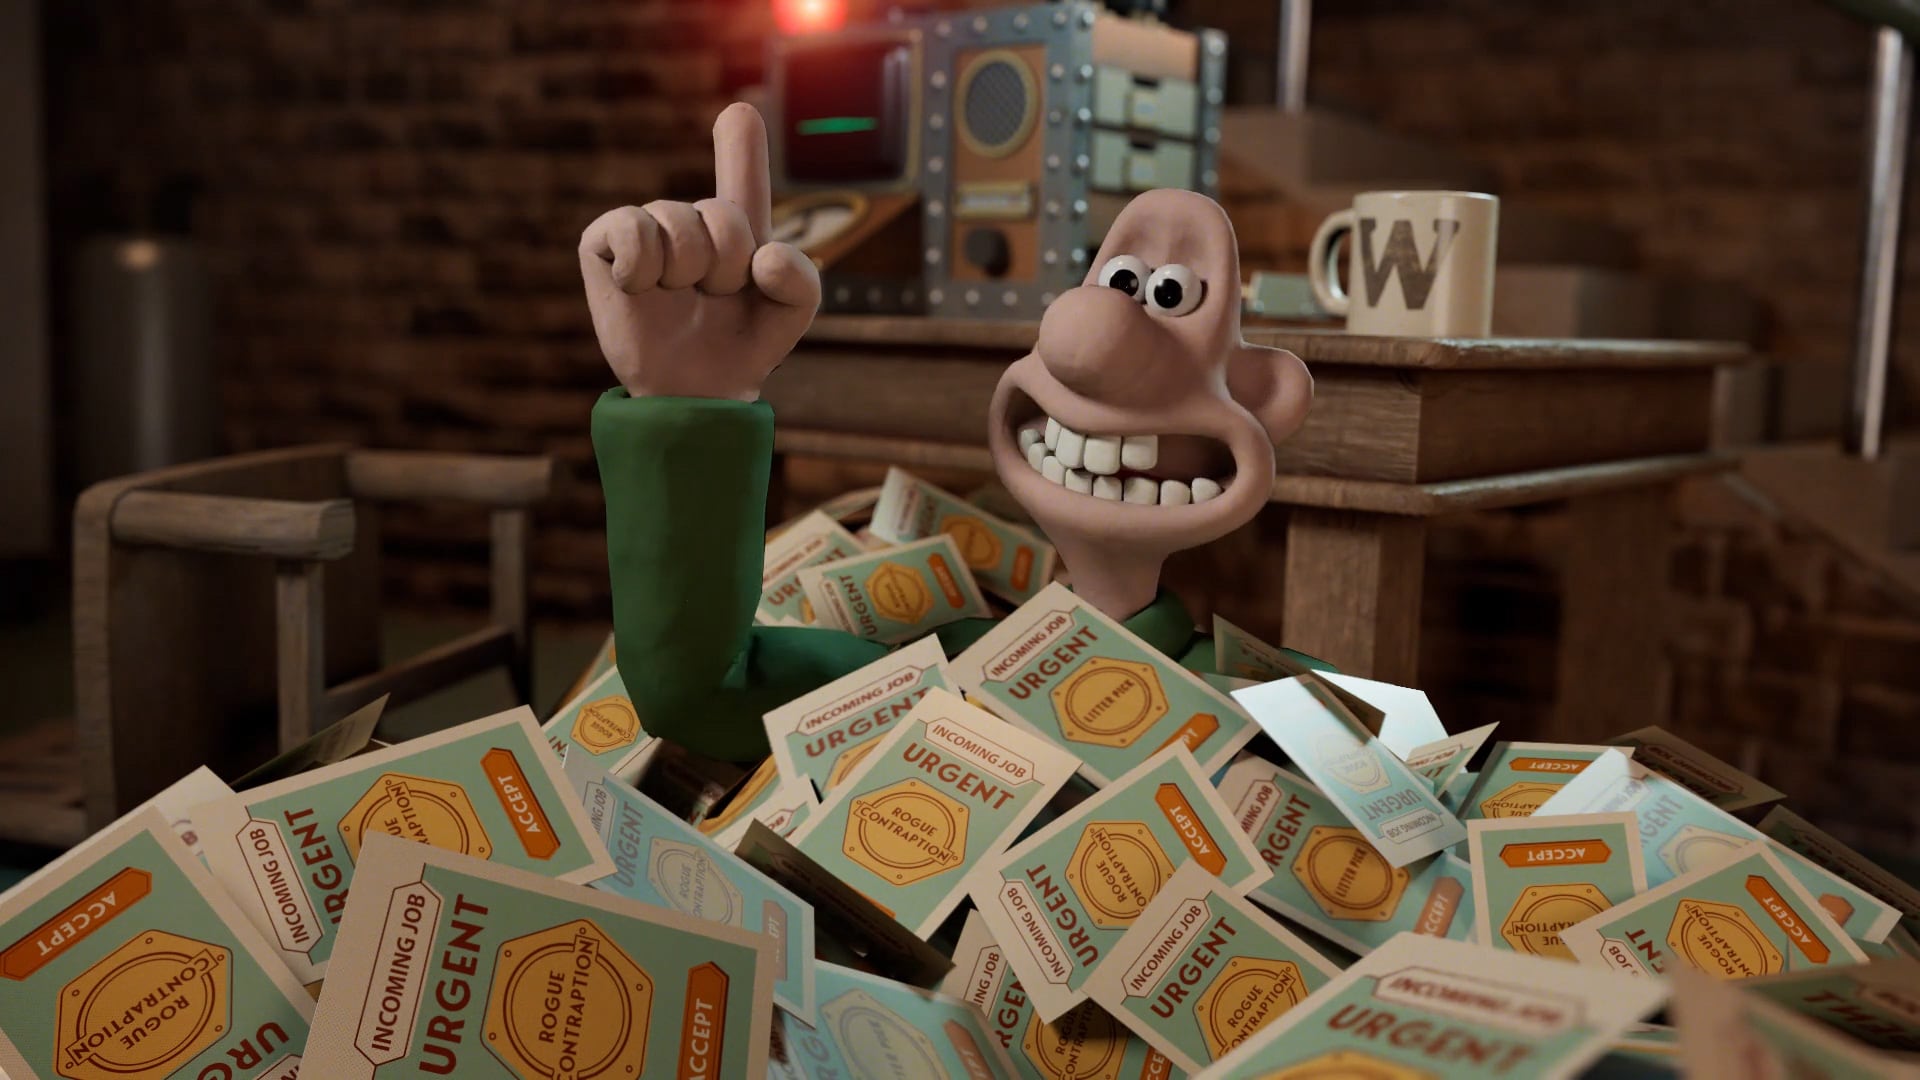 A still frame from Fictioneers' and Aardman's immersive, augmented-reality mobile app "Wallace & Gromit: The Big Fix-Up", featuring Wallace, in his workshop. Wallace is smiling with his mouth wide open and is covered up to his neck by printed tickets.